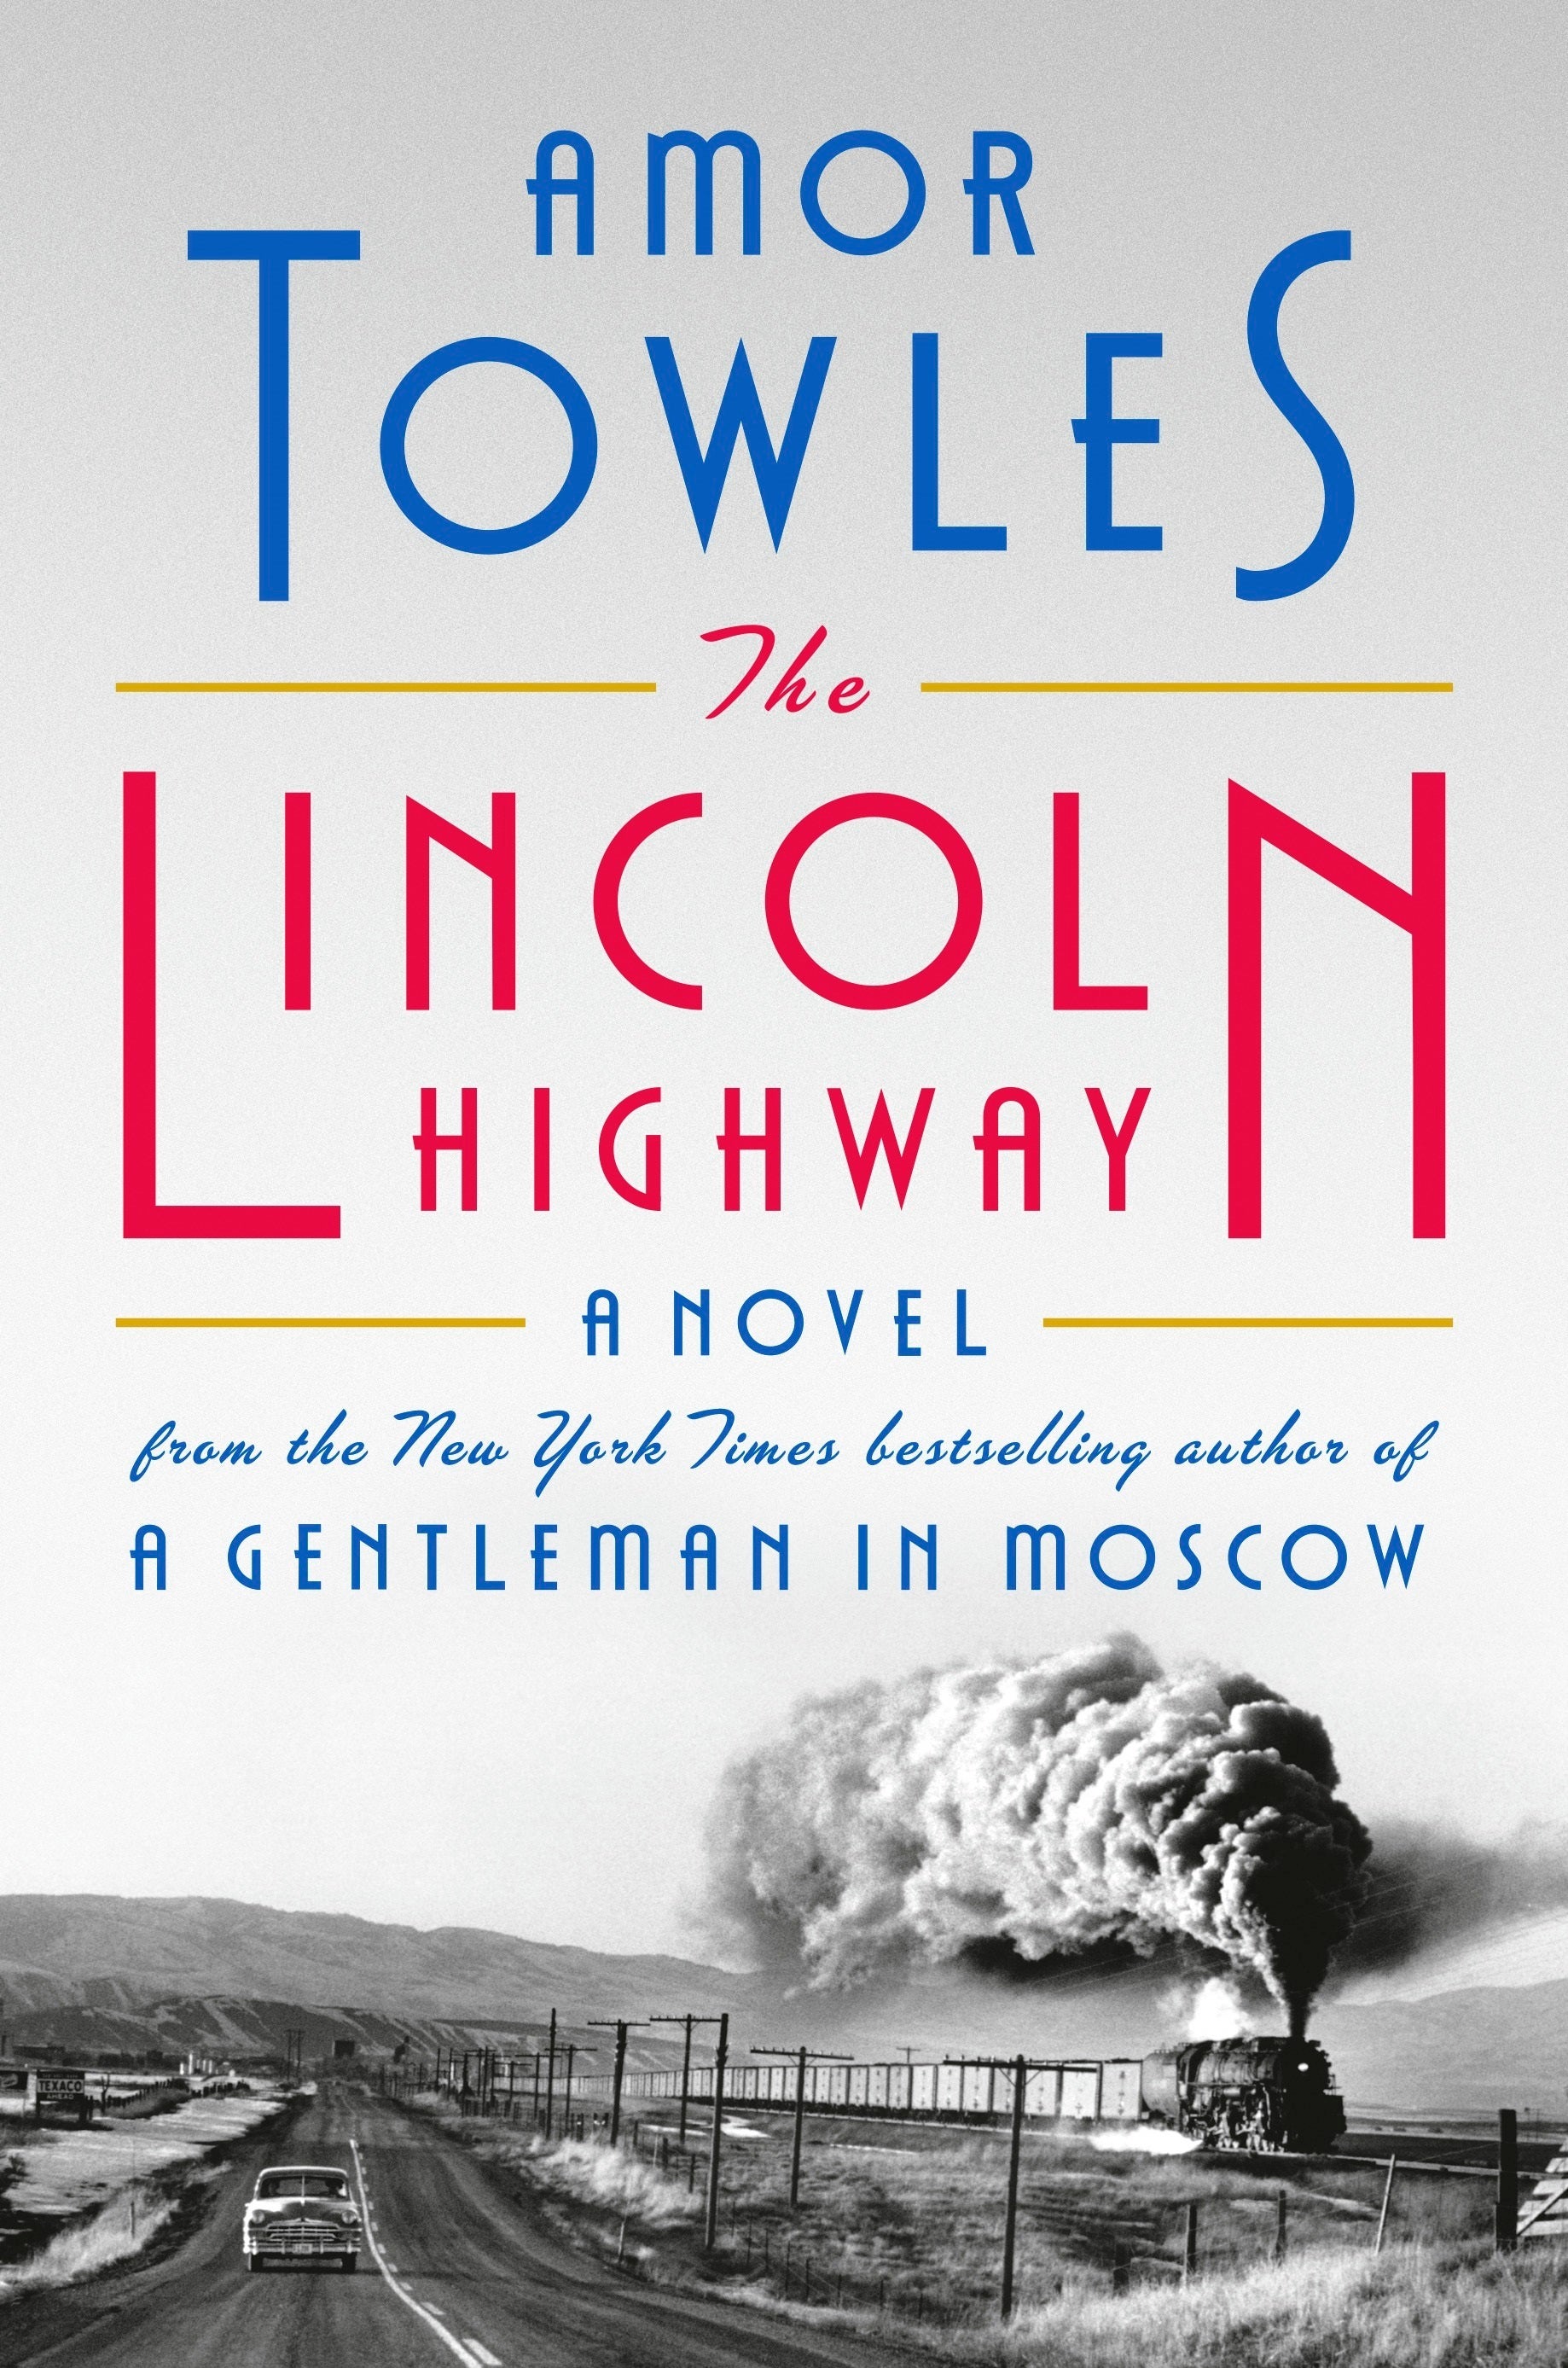 Book Review - The Lincoln Highway